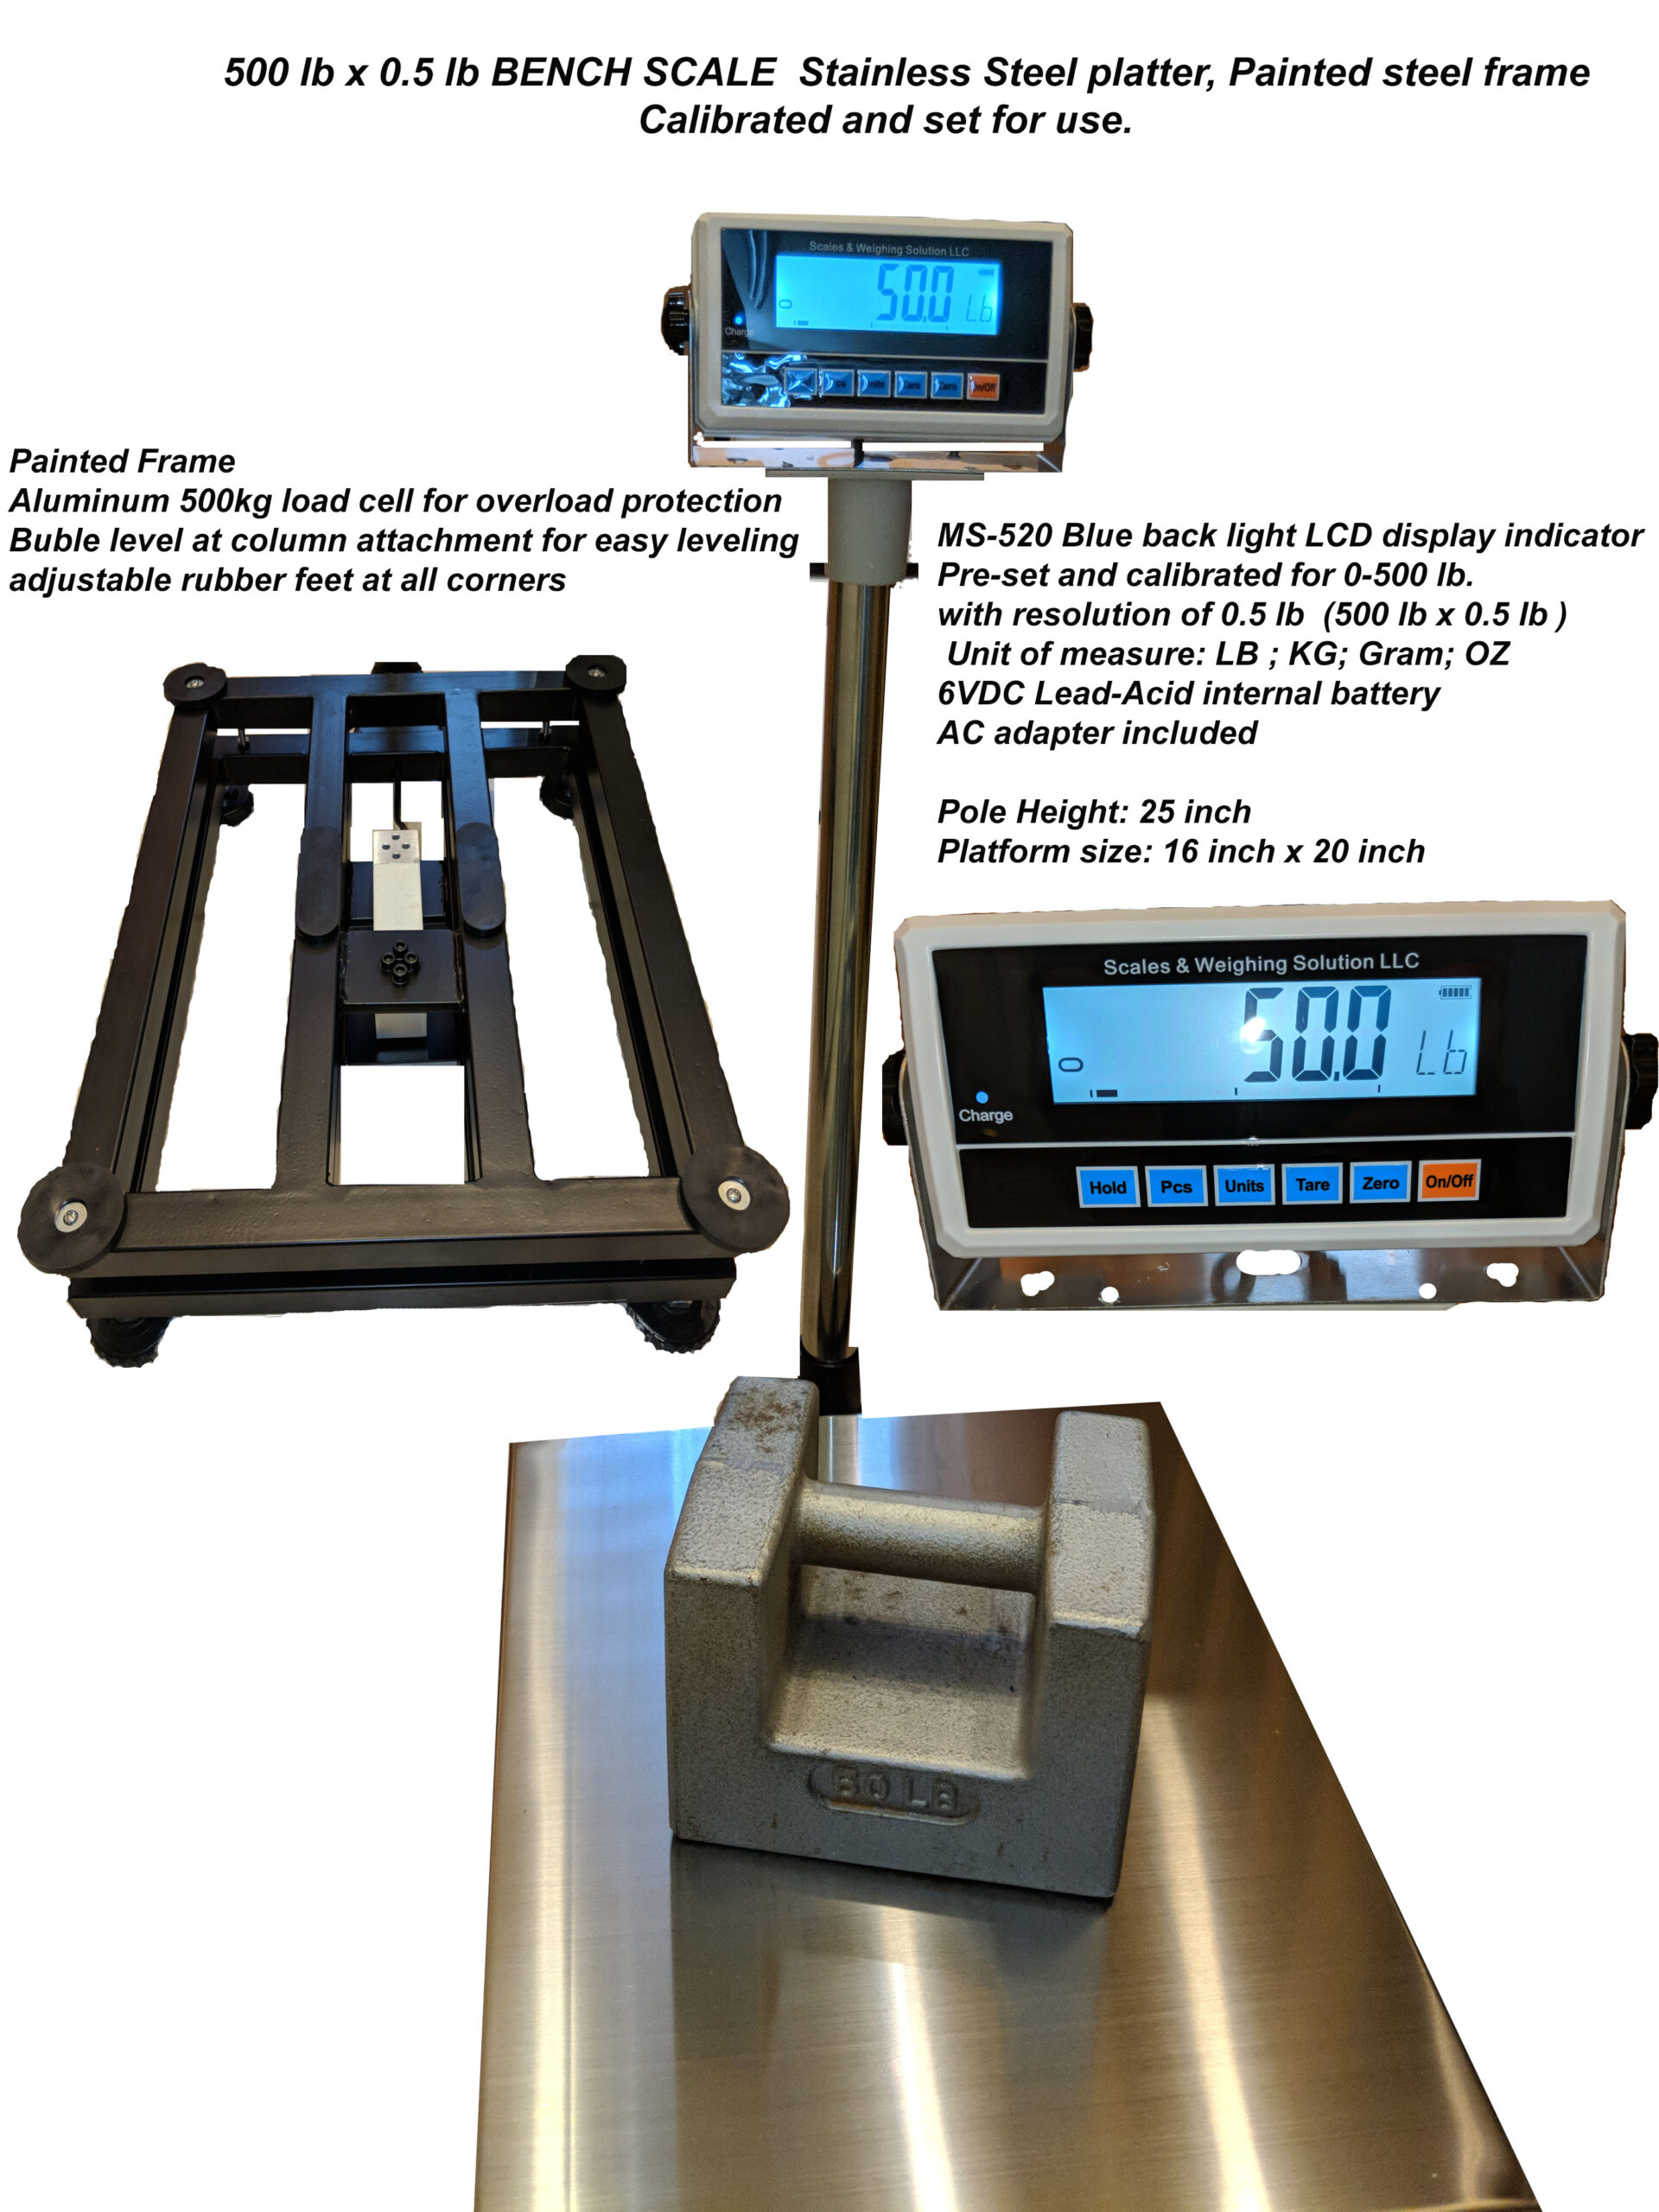 Bench scale Industrial bench scale